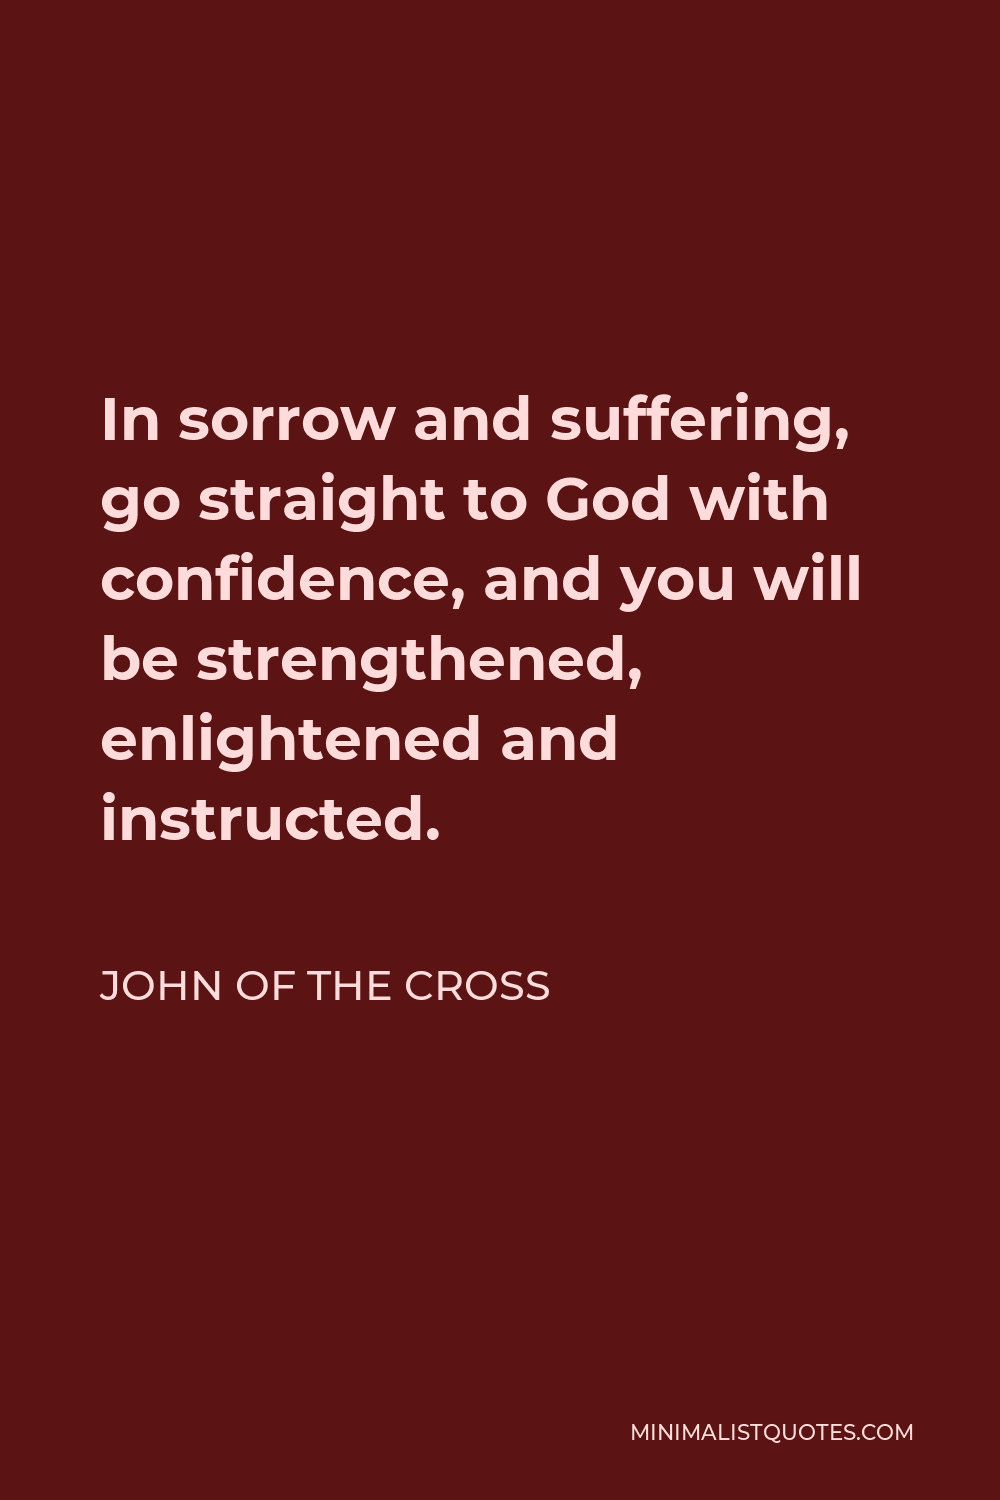 John of the Cross Quote - In sorrow and suffering, go straight to God with confidence, and you will be strengthened, enlightened and instructed.